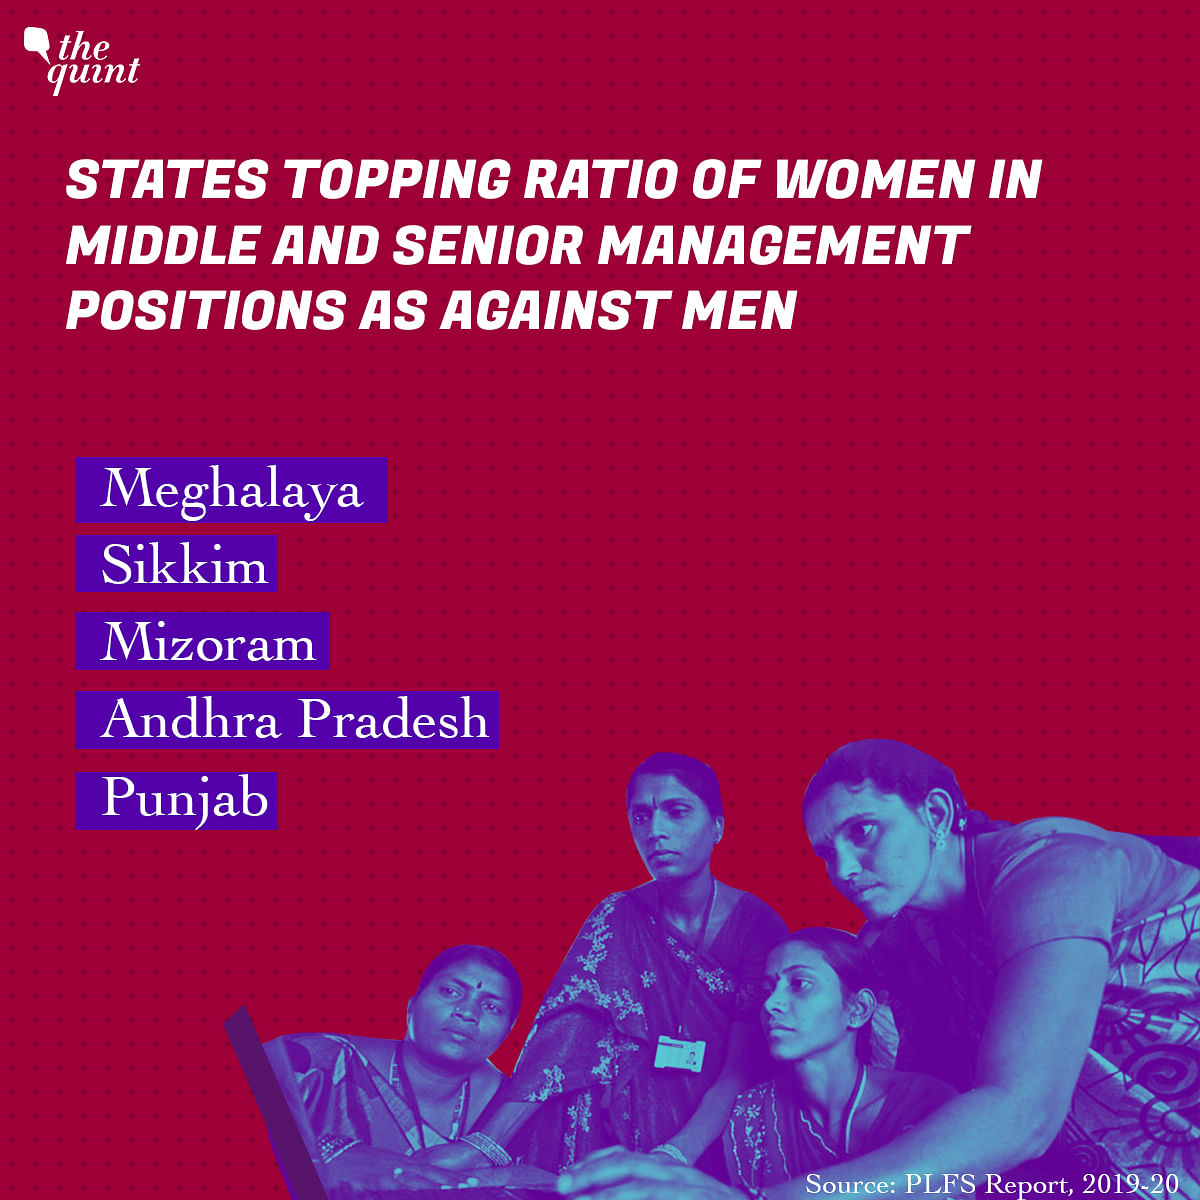 Meghalaya topped with highest ratio of women workers to total workers in senior and middle management positions.